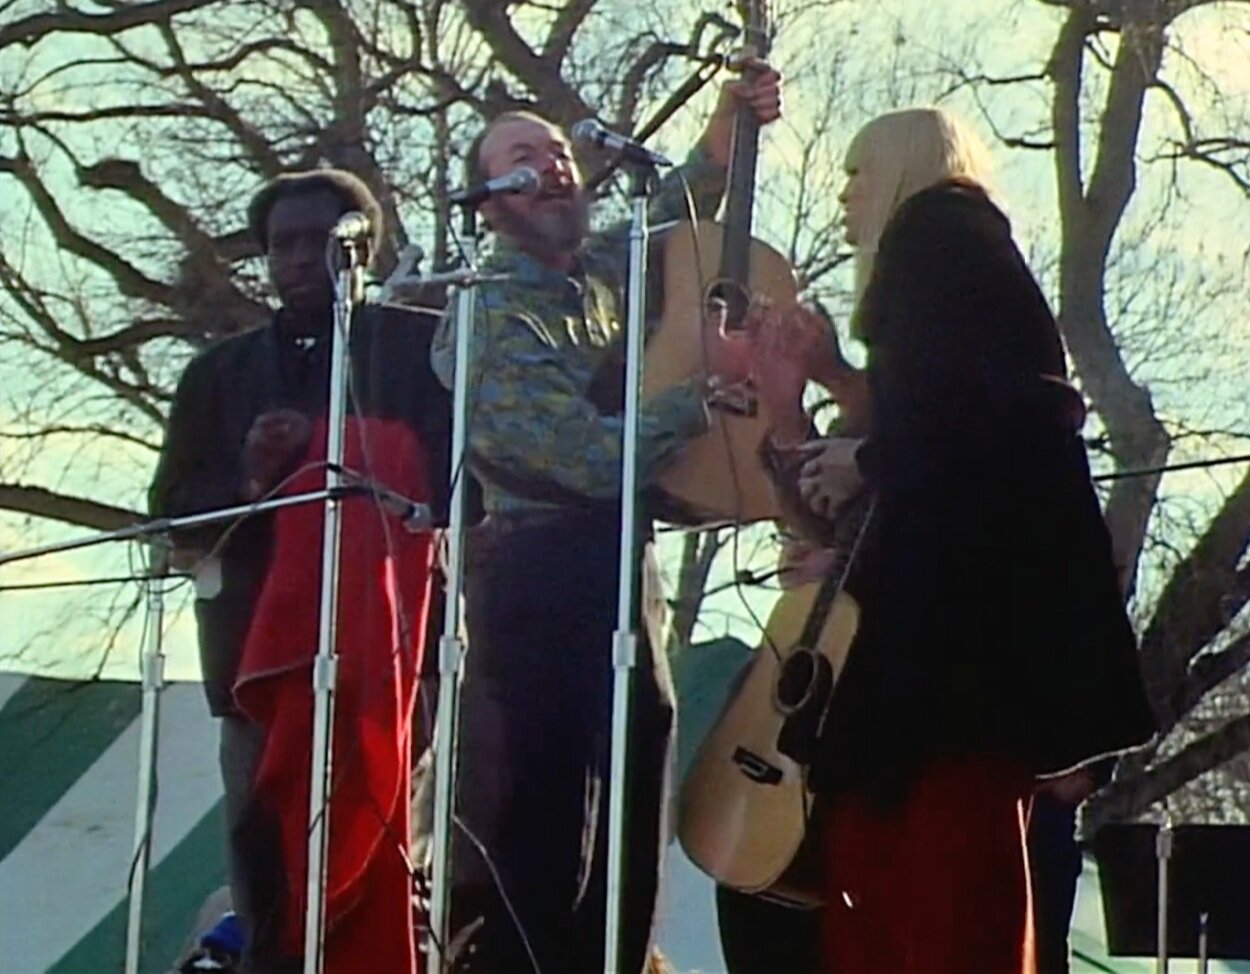  Pete Seeger and friends singing at the Moratorium Against the Vietnam War in Washington DC, November 15, 1969. Photo credit:  U.S. National Archives and Records 